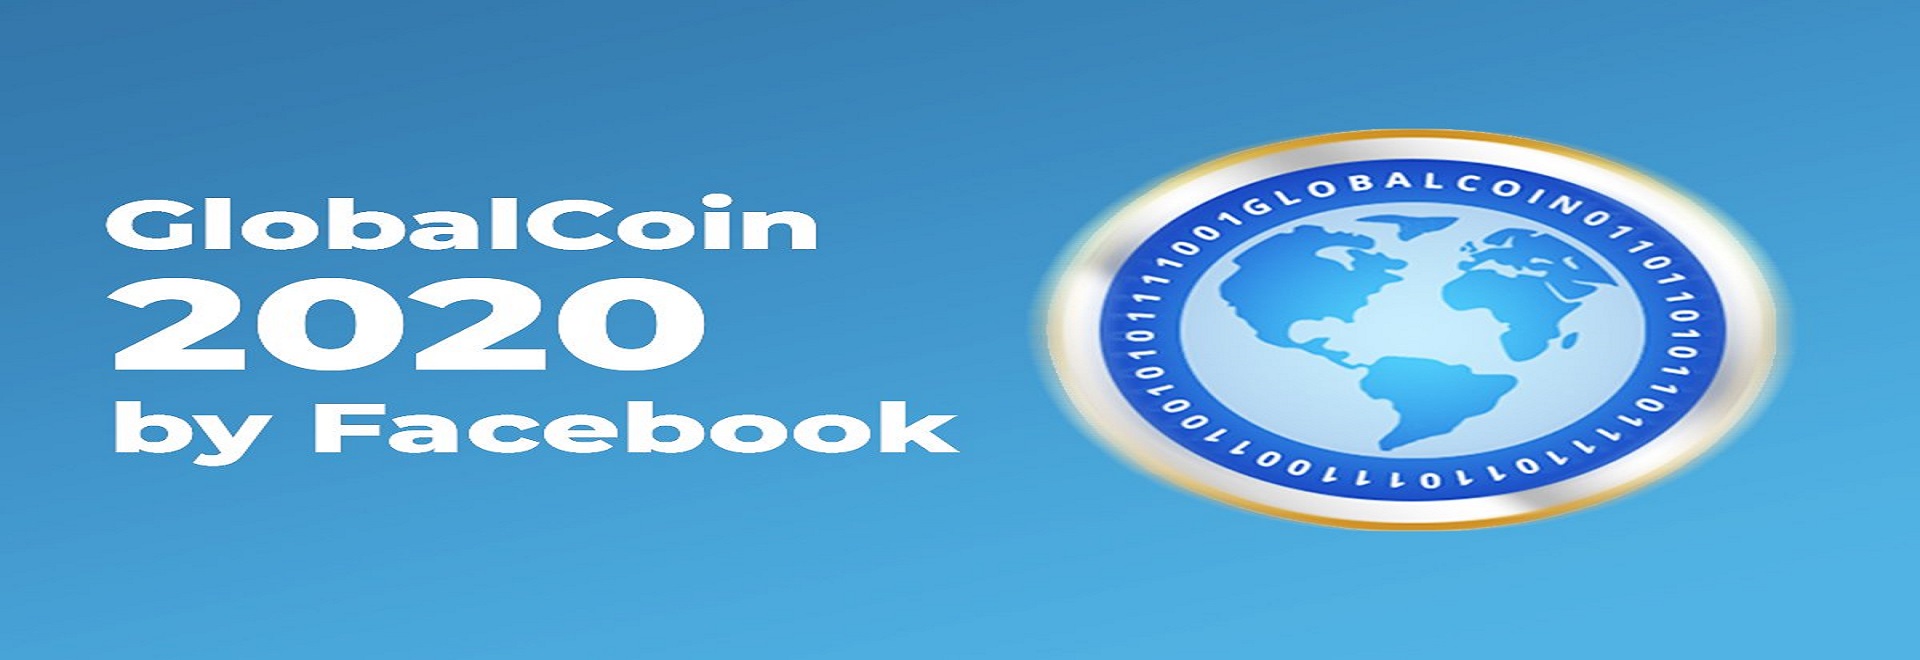 GlobalCoin Bitcoin Rival to Be Launched in Q1 2020 by Facebook - اخبار شنبه مورخ 98/3/4